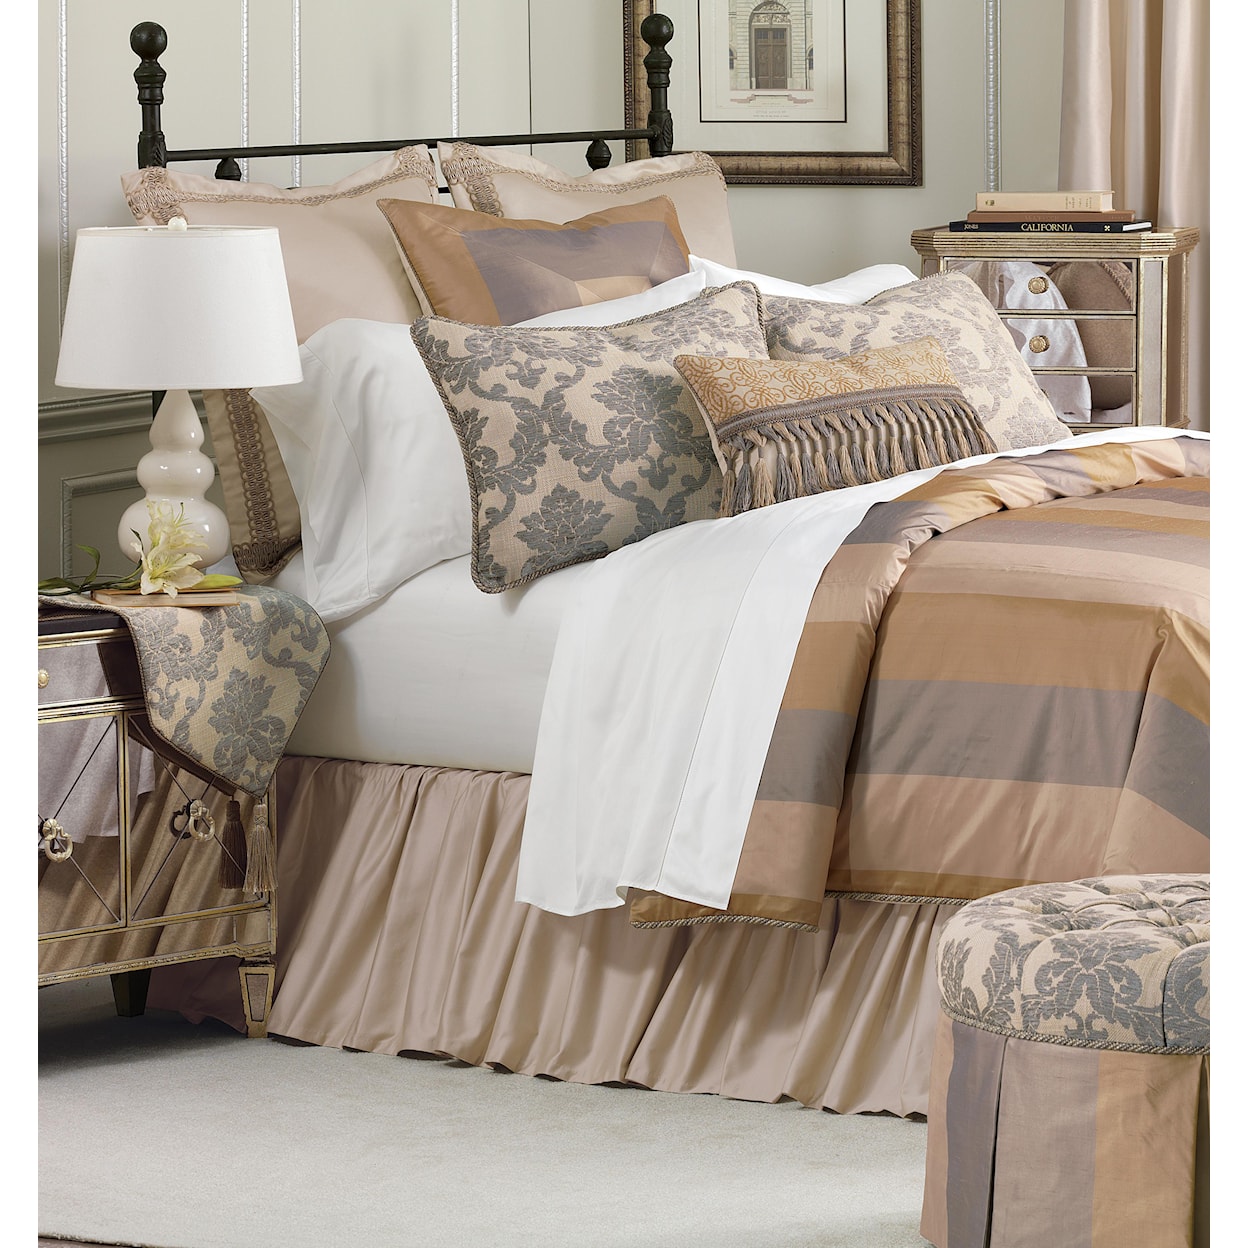 Eastern Accents Lancaster Queen Hand-Tacked Comforter